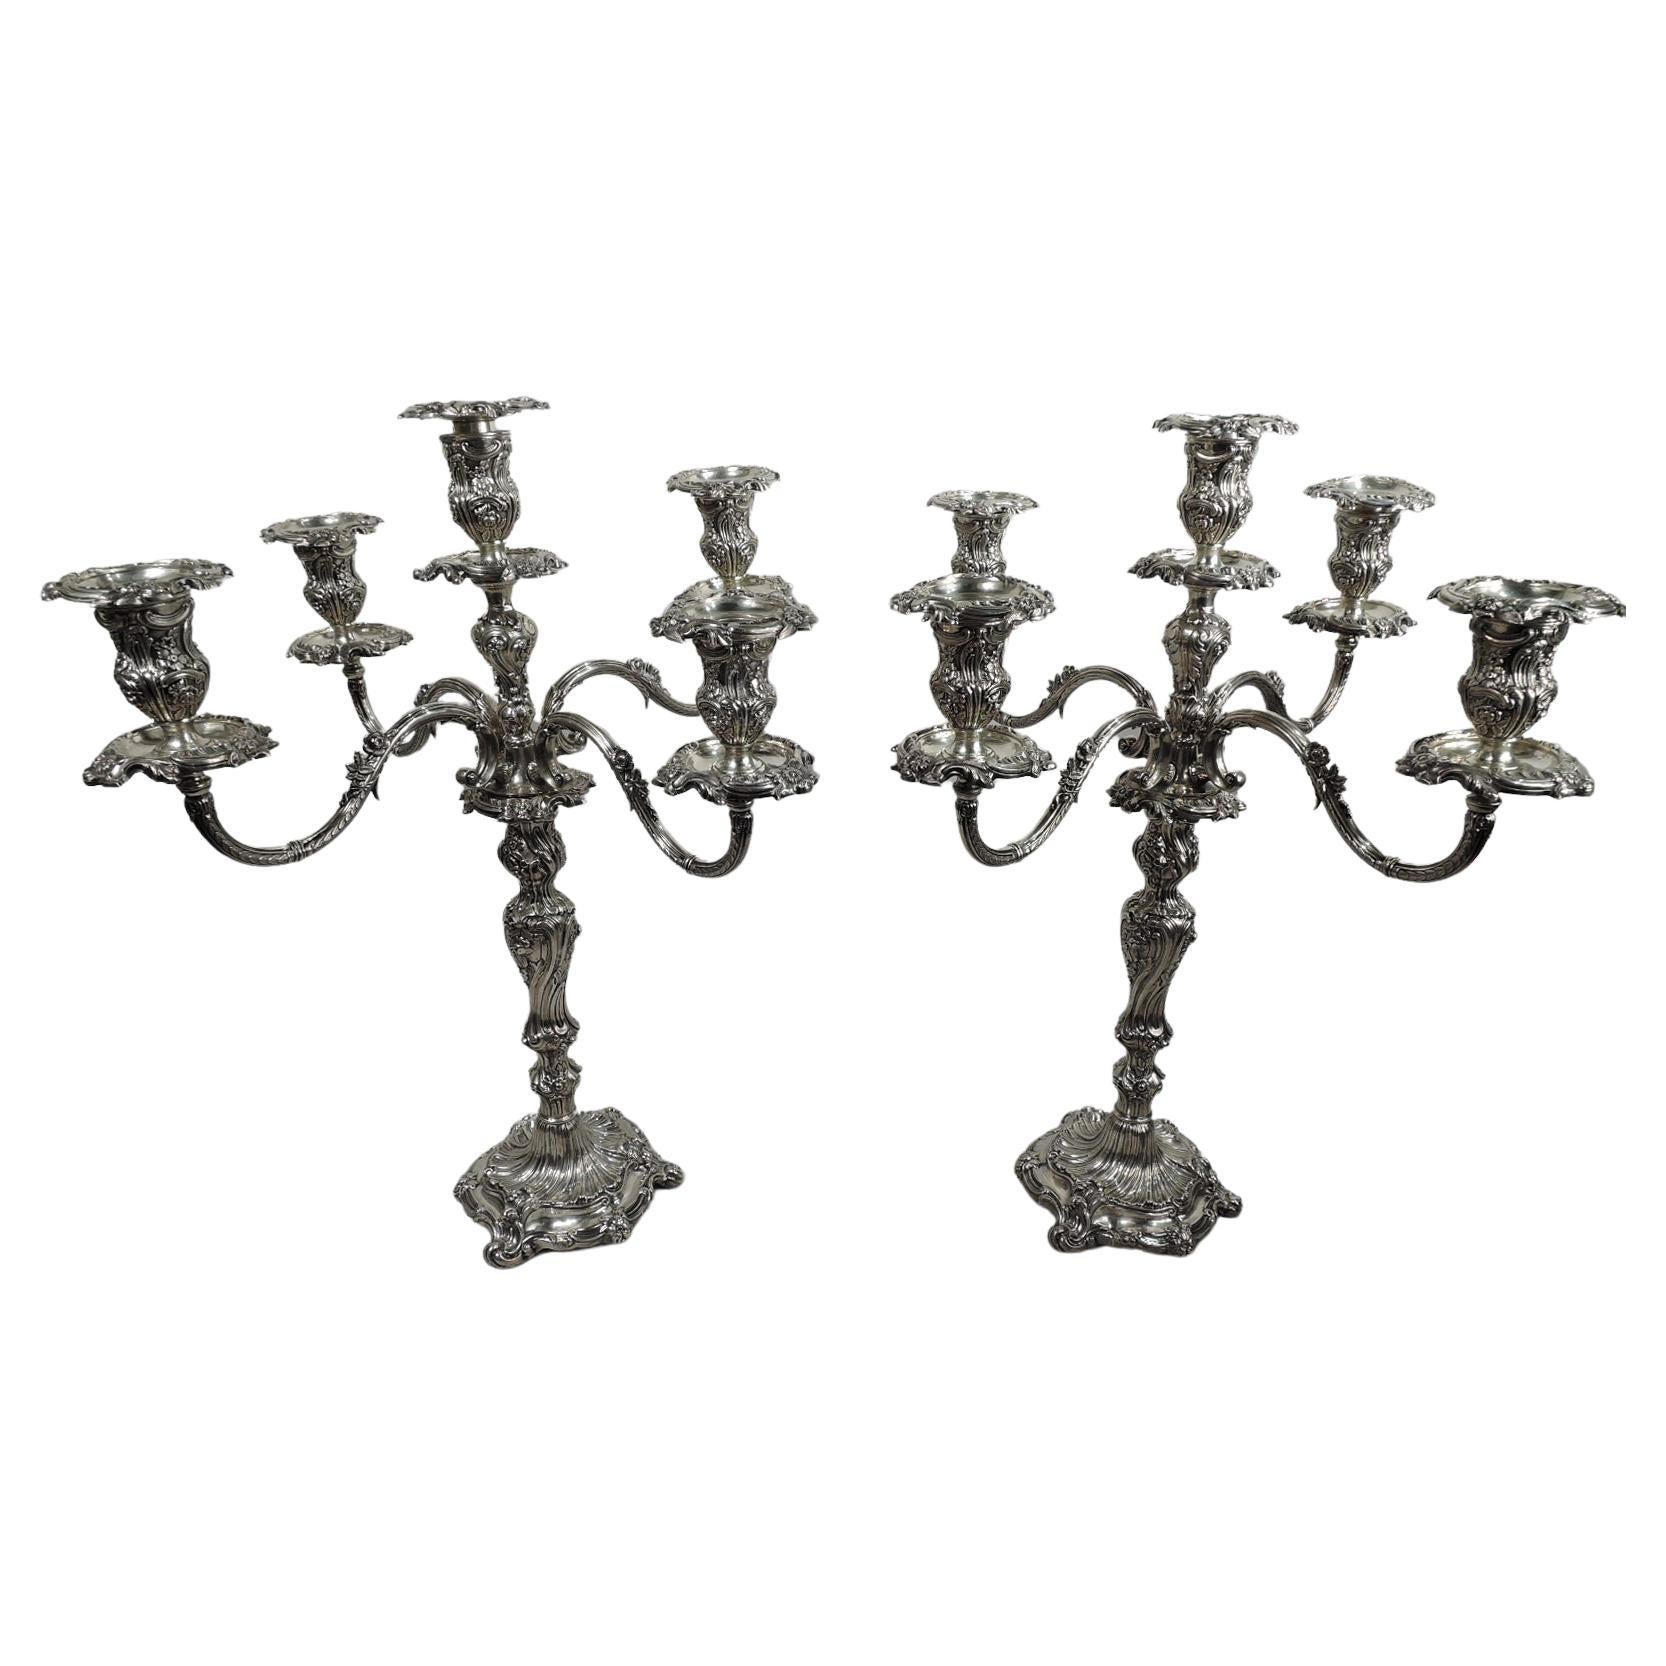 Pair of Antique English Rococo Sterling Silver 5-Light Candelabra